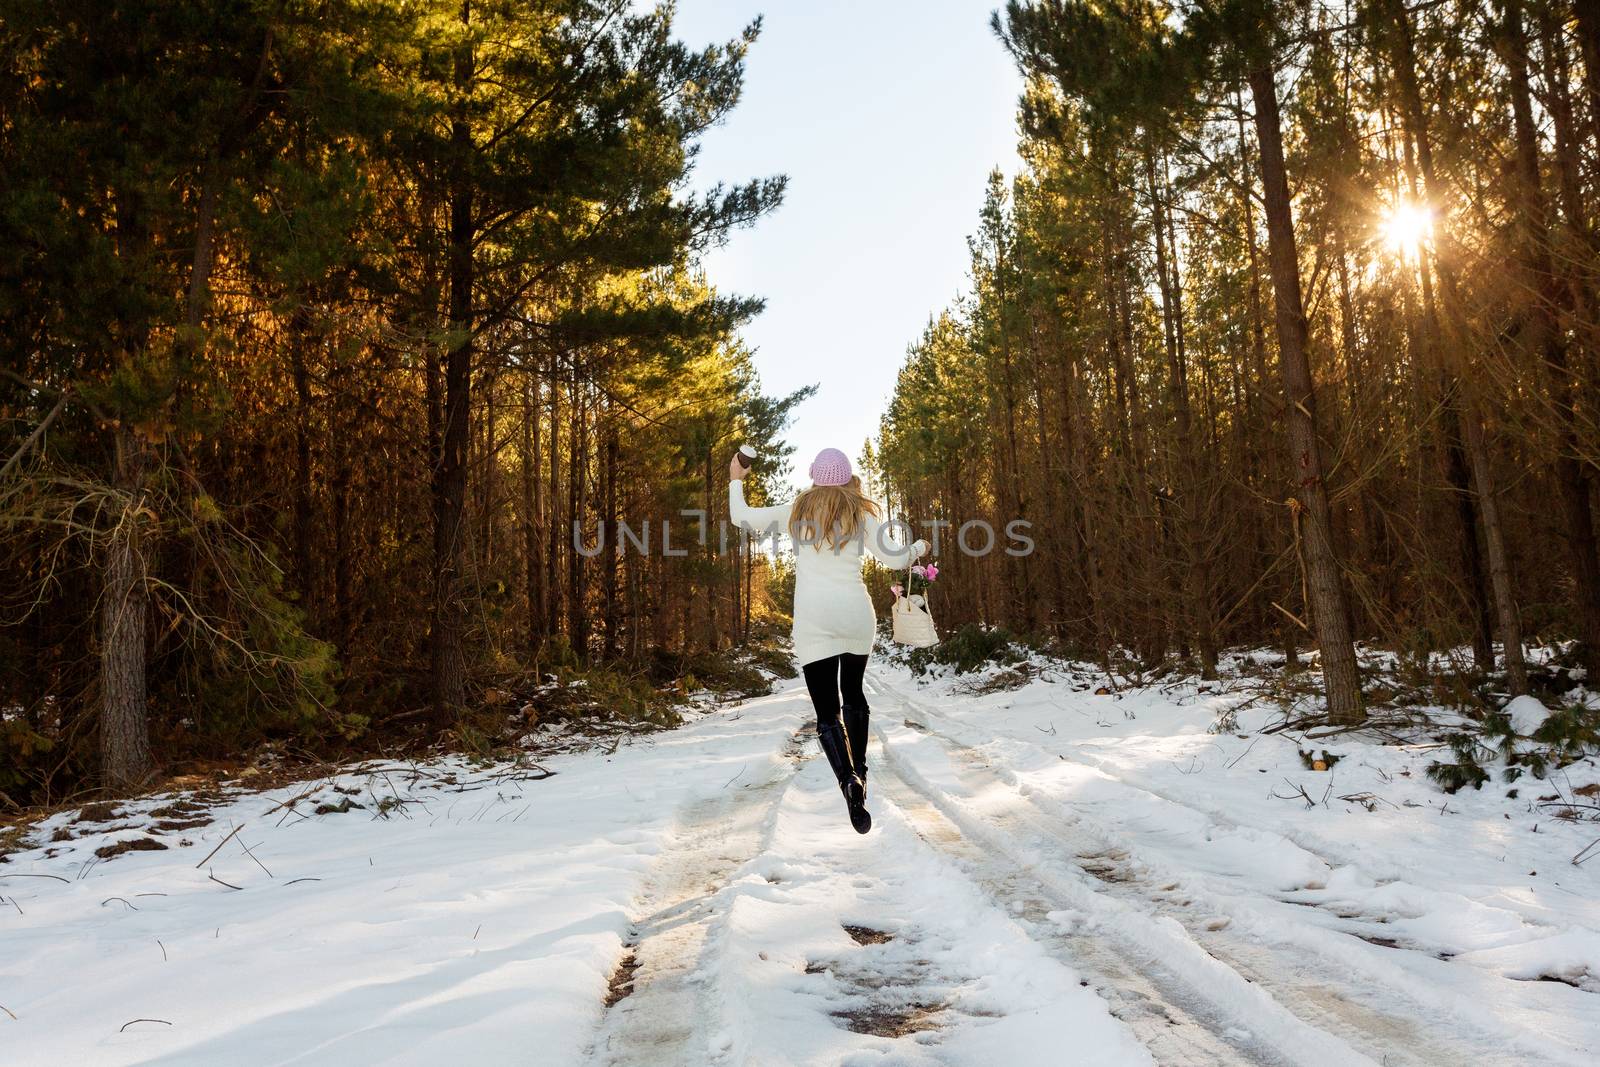 Energetic woman frolicking in the snow among the forest trees by lovleah